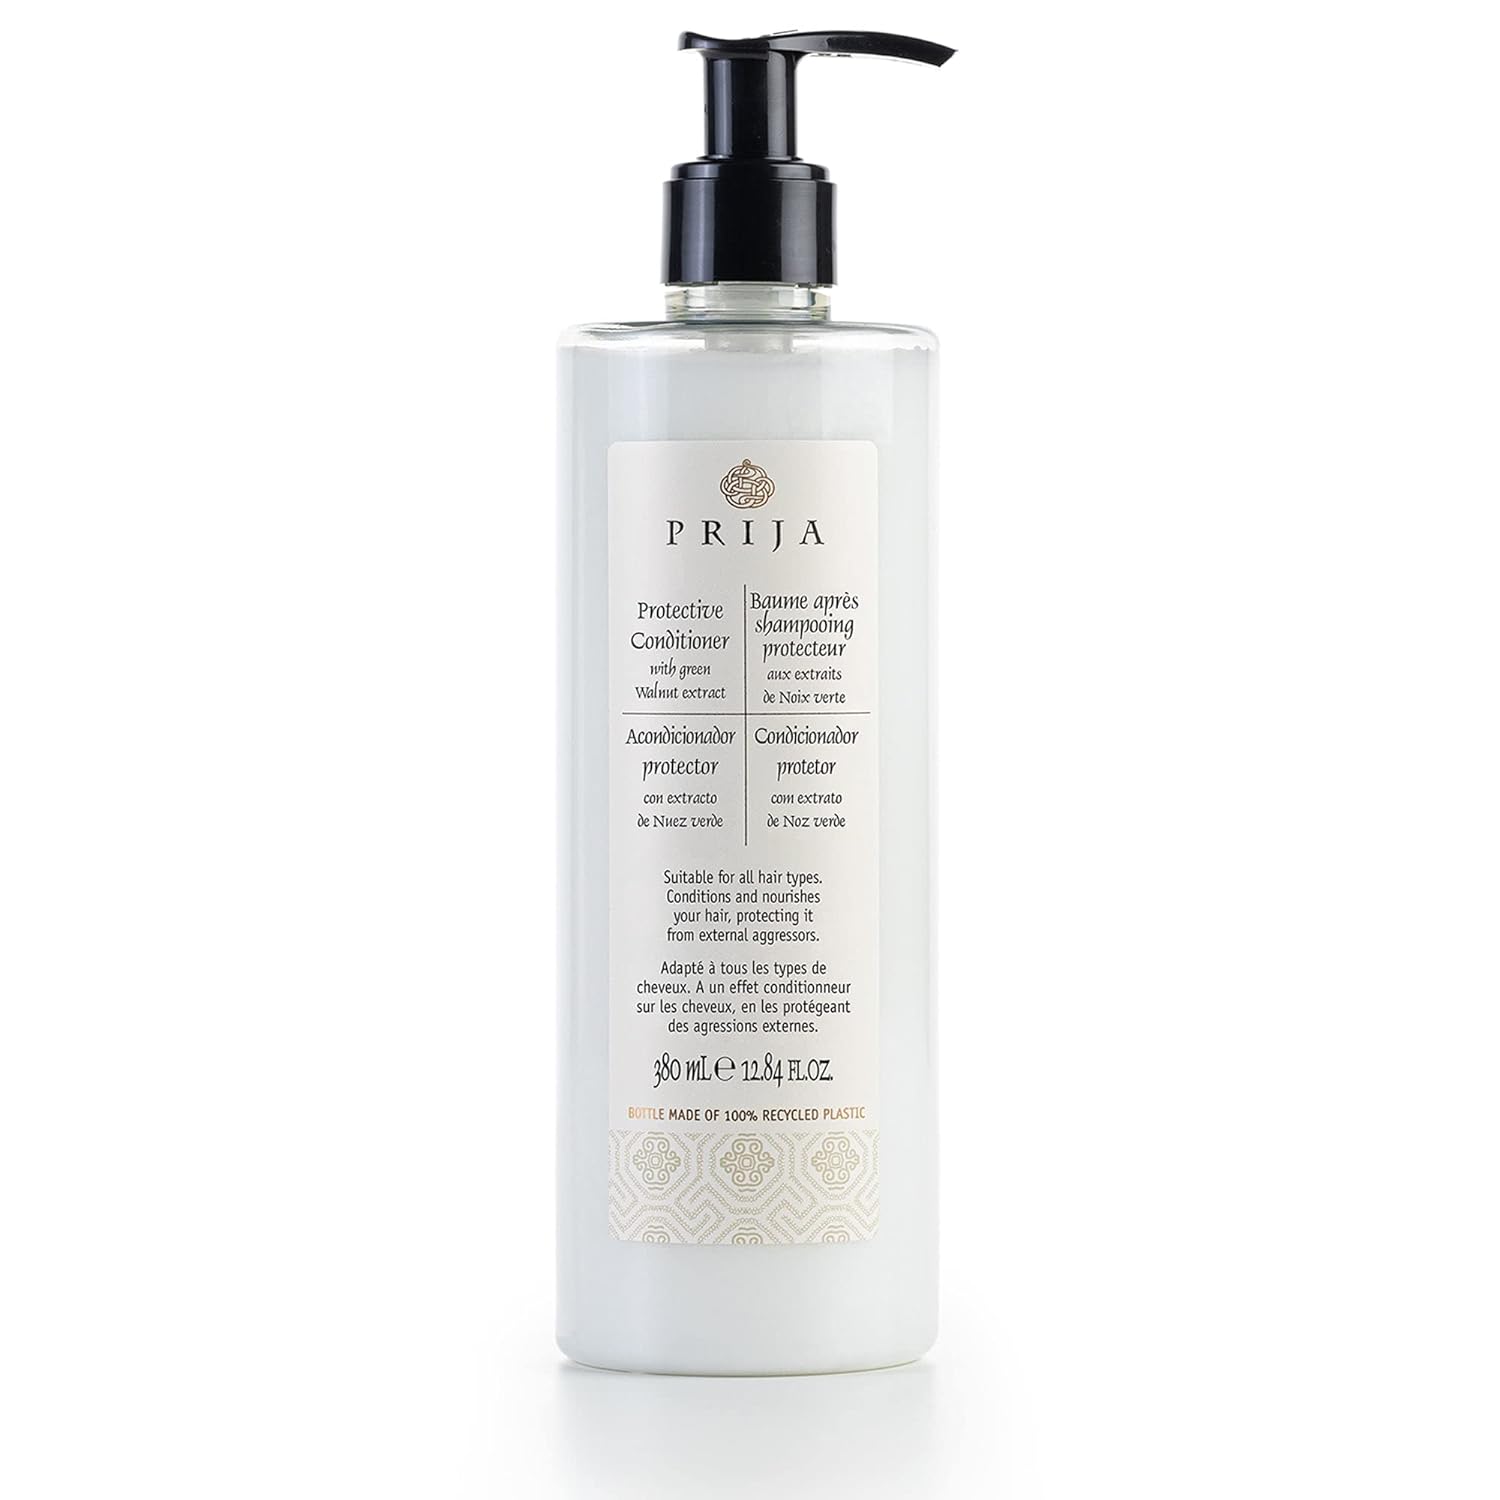 Prija Protective Hair Conditioner with Green Walnut Extract (12.84  ) - For all Hair Types - Vegan Friendly - Dermatologically Tested - Made with 100% Recycled Bottle